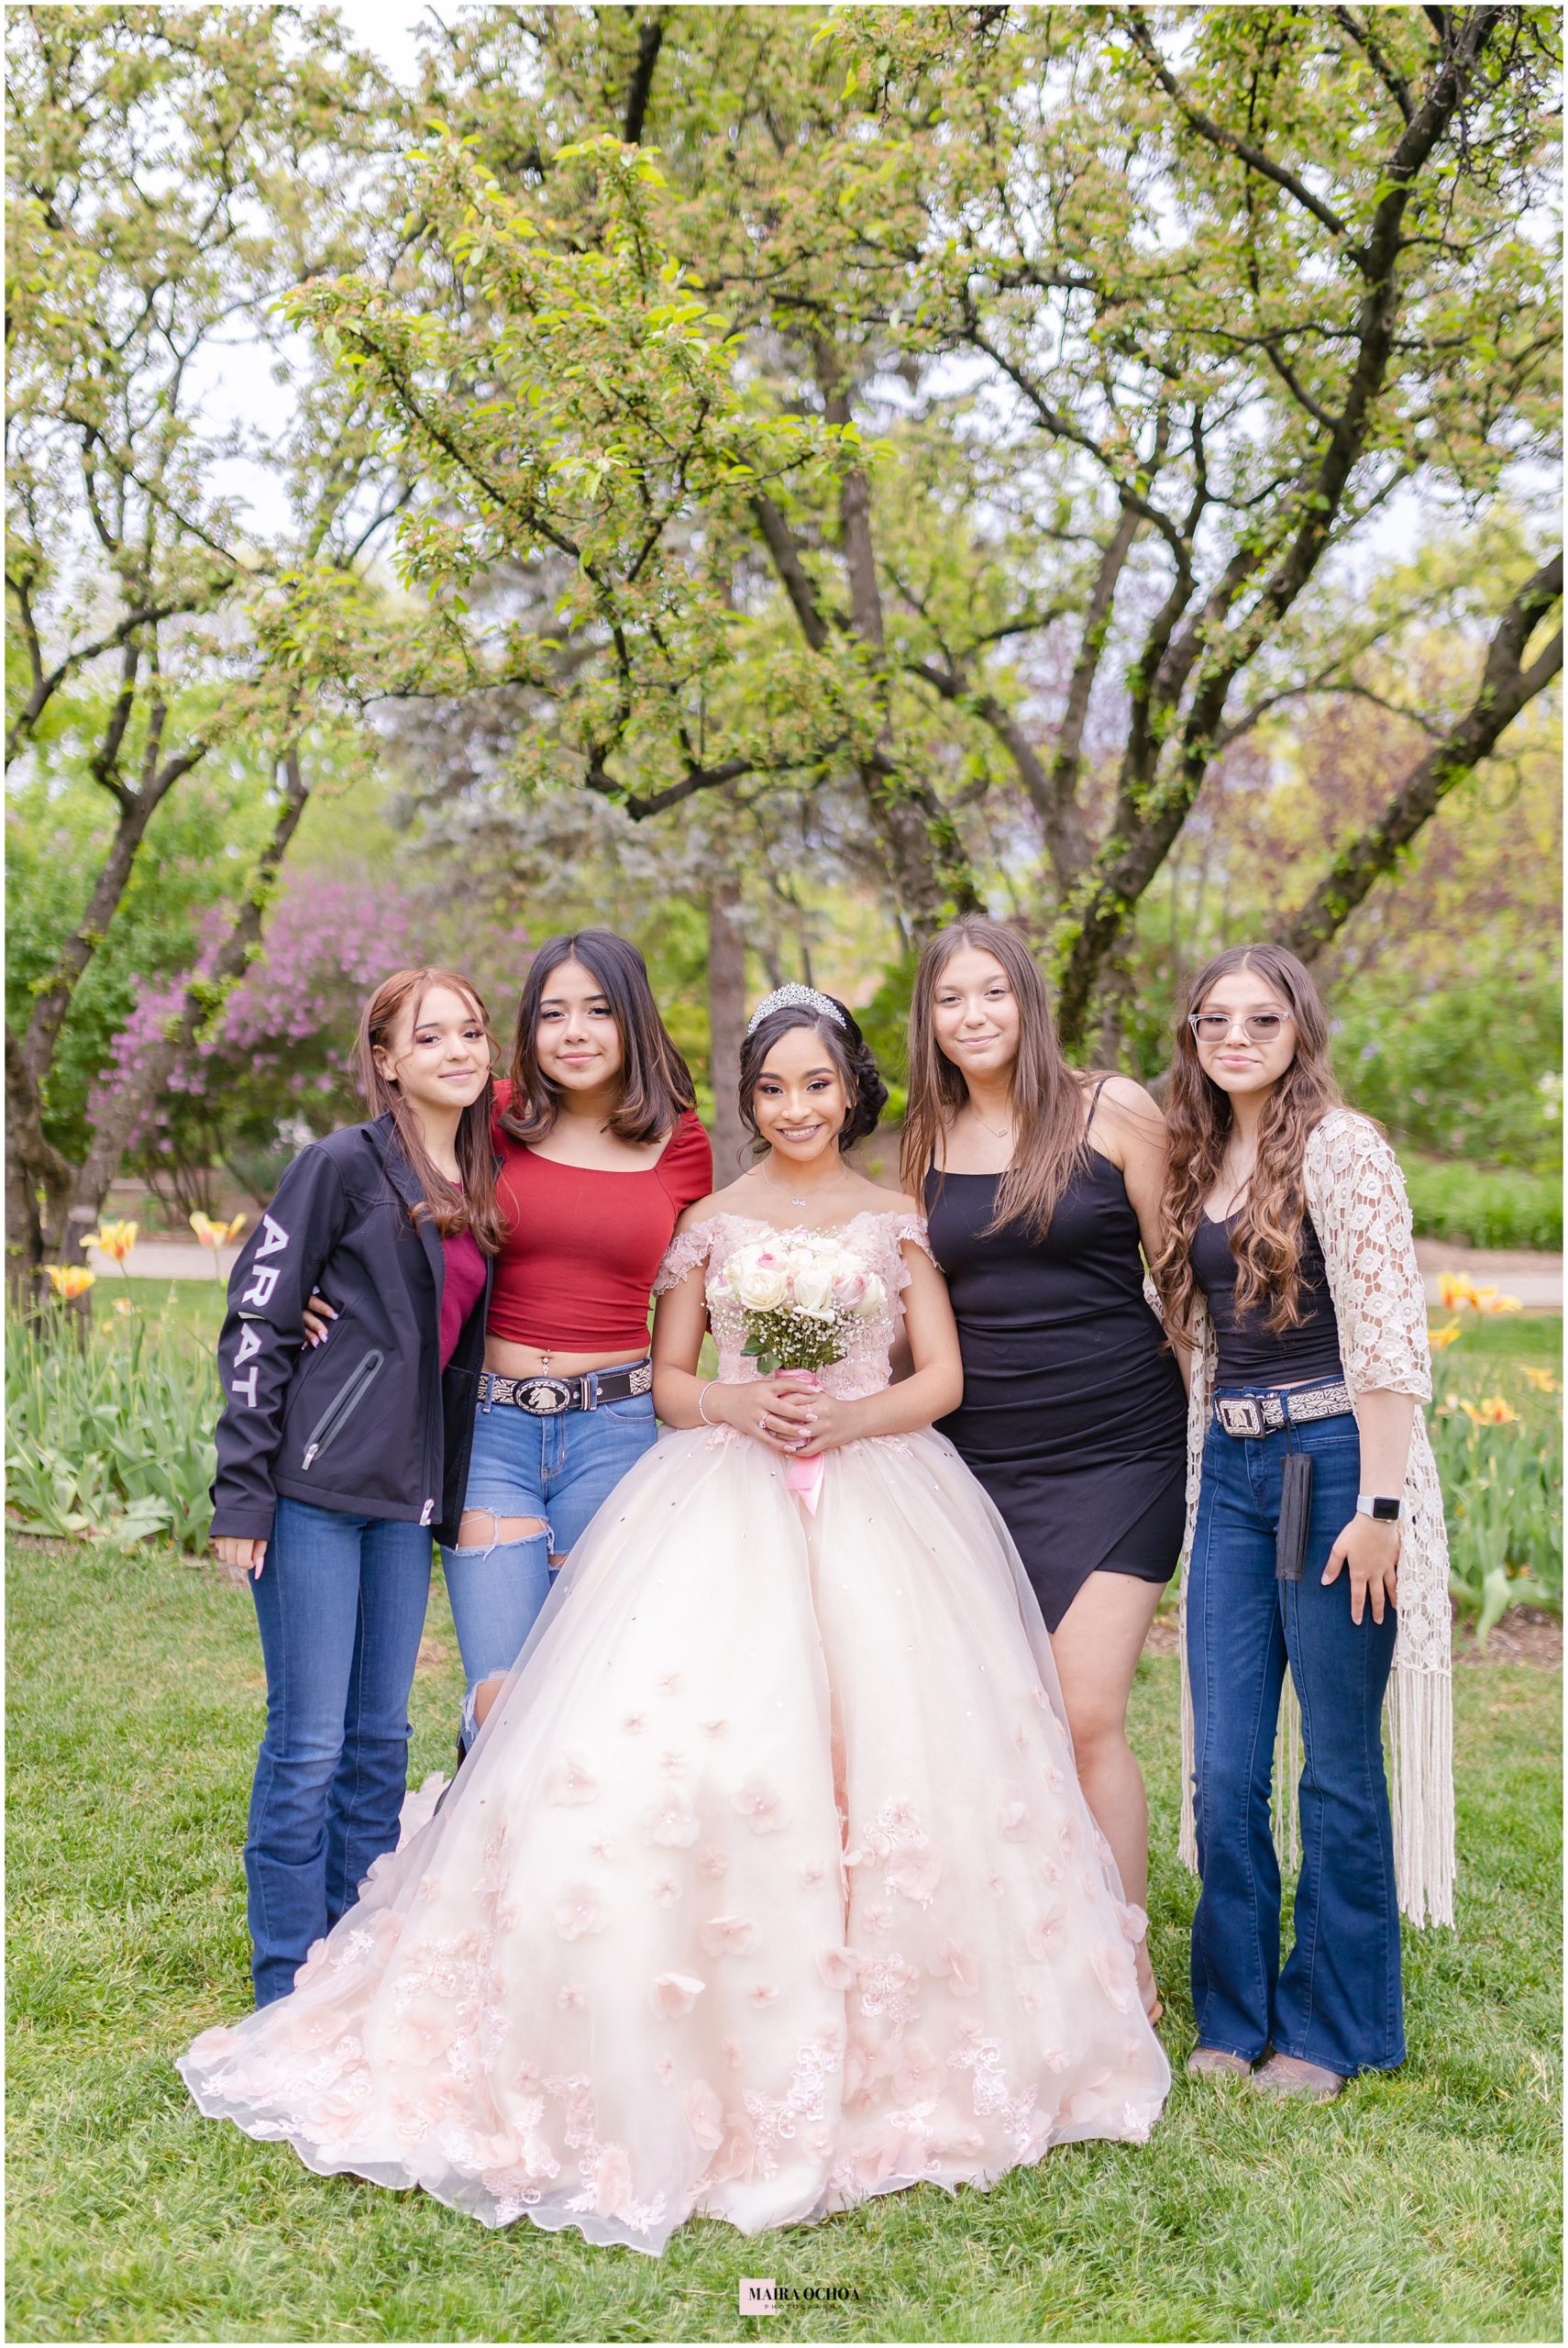 Quinceañera and her girl friends formal portraits at the Lilacia Park, Lombard IL